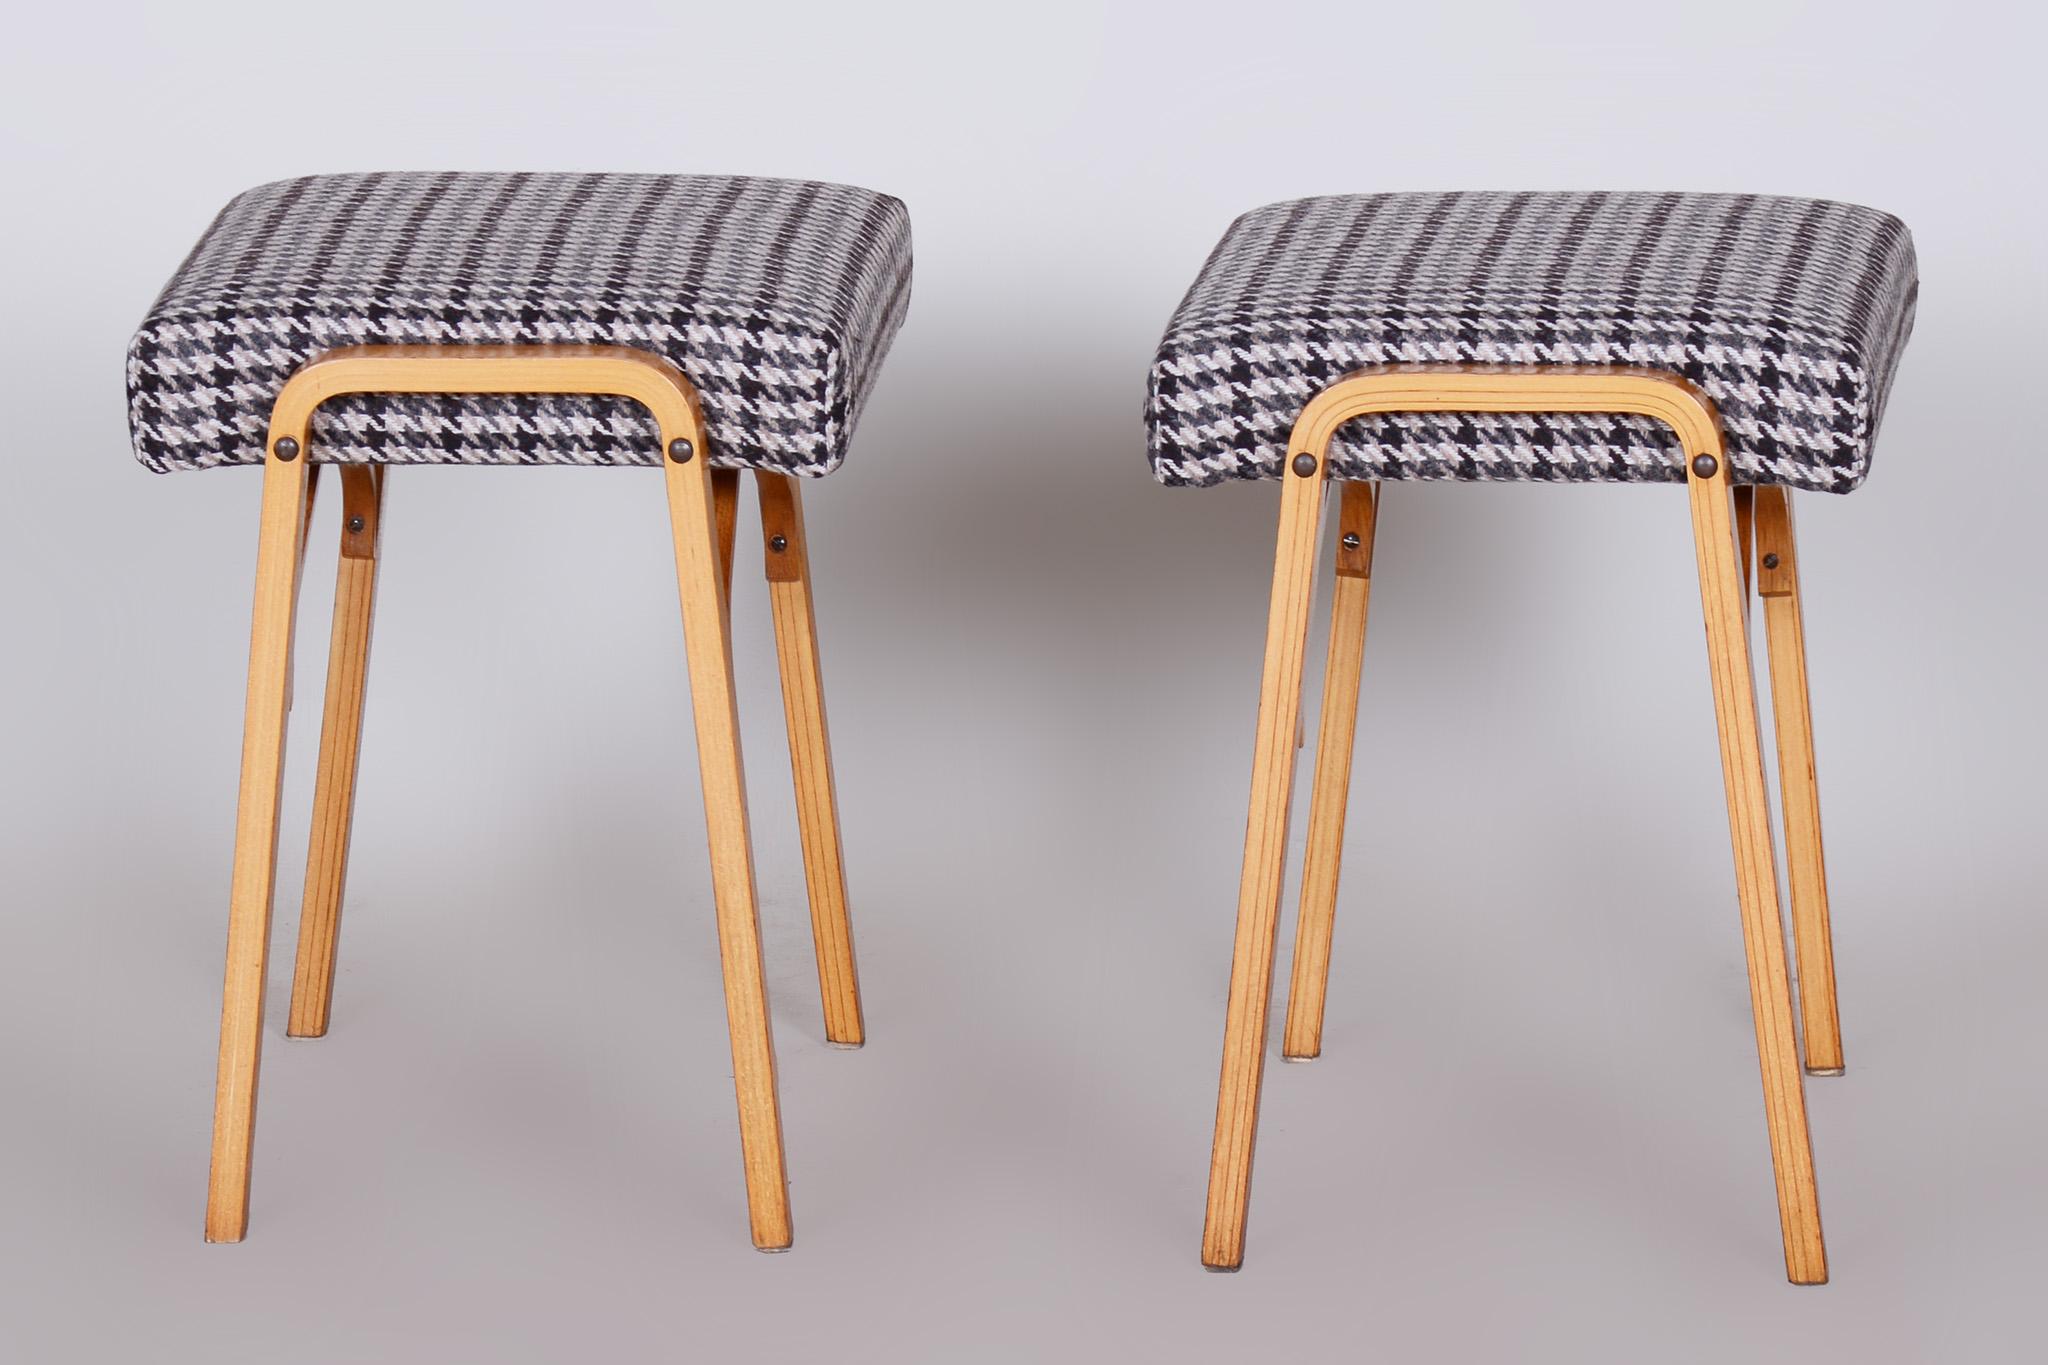 20th Century Pair of Midcentury Beech Stools by Ludvik Volak, Czechia, 1950s For Sale